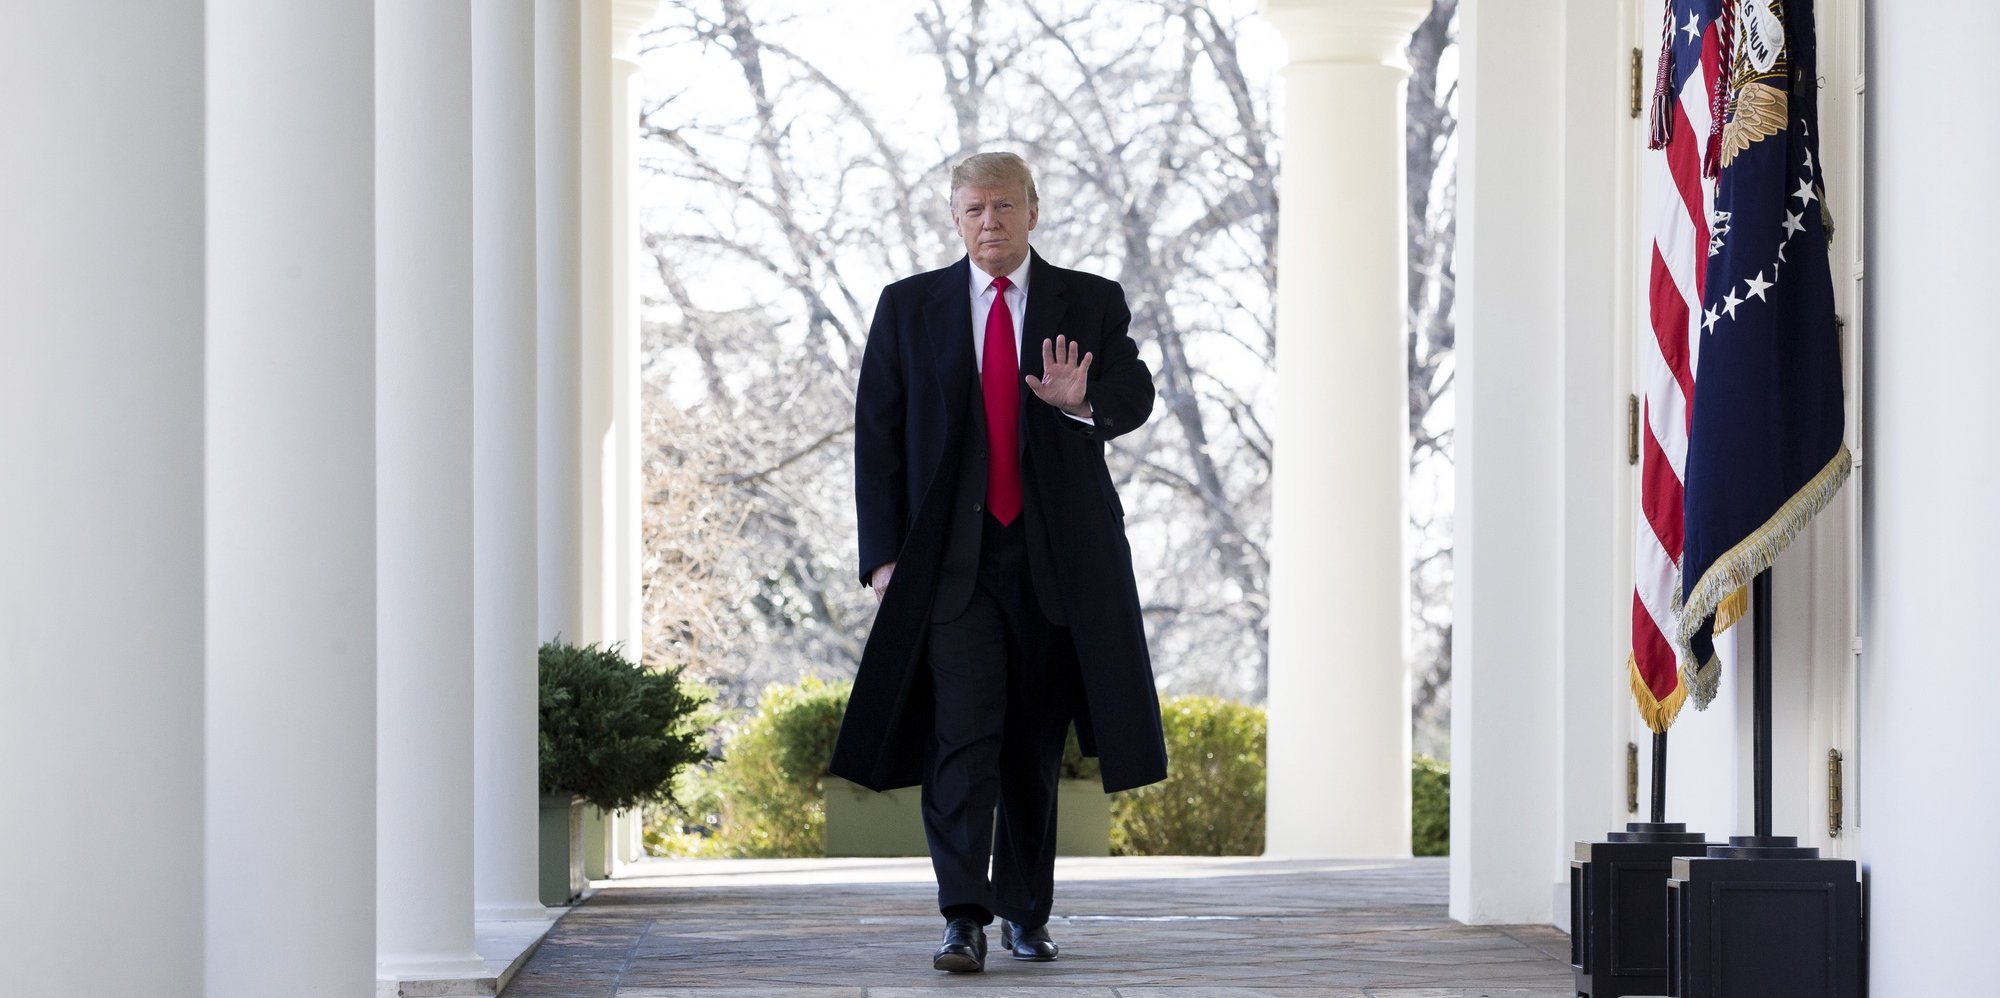 epa08805173 (FILE) US President Donald J. Trump walks down the Colonnade to deliver remarks on ending the partial shutdown of the federal government, in the Rose Garden of the White House in Washington, DC, USA, 25 January 2019 (issued 07 November 2020). According to media report on 07 November 2020, Joe Biden has won the Electoral College&#039;s majority following the 03 November presidential election.  EPA/MICHAEL REYNOLDS *** Local Caption *** 54933254